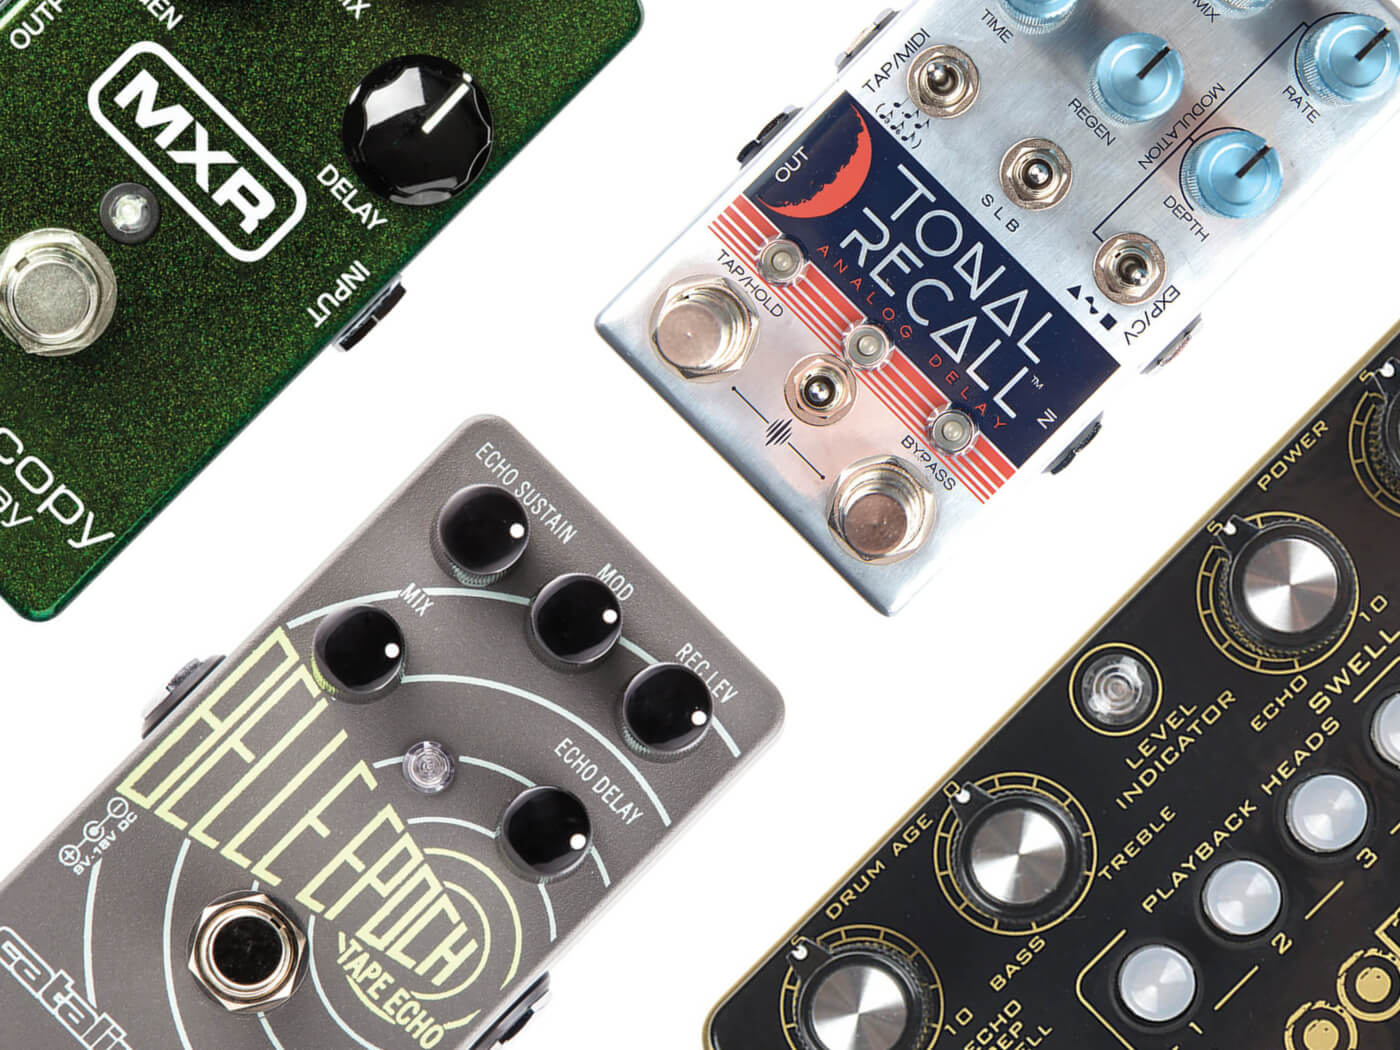 Eight best delay pedals for guitarists in 2019 All